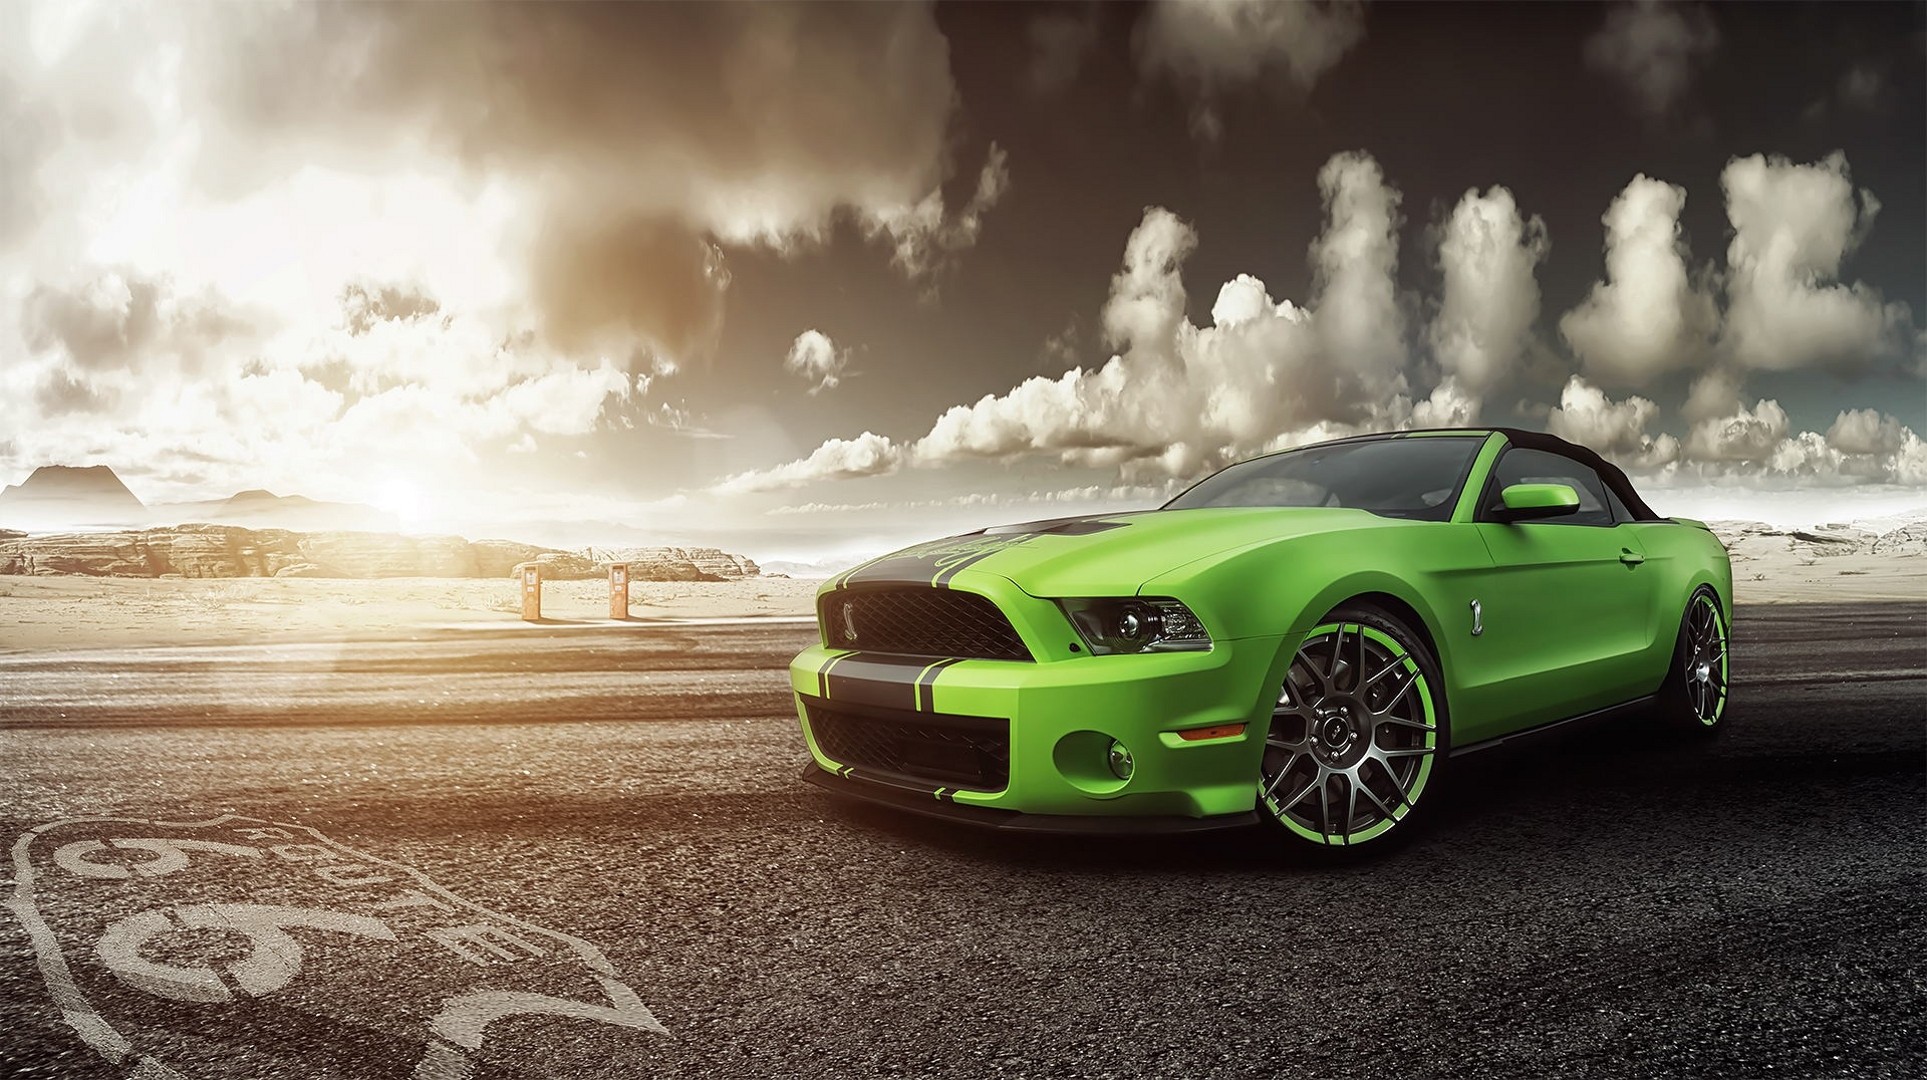 Ford Mustang Shelby Gt Car Green Cars Wallpapers Hd Desktop And Mobile Backgrounds